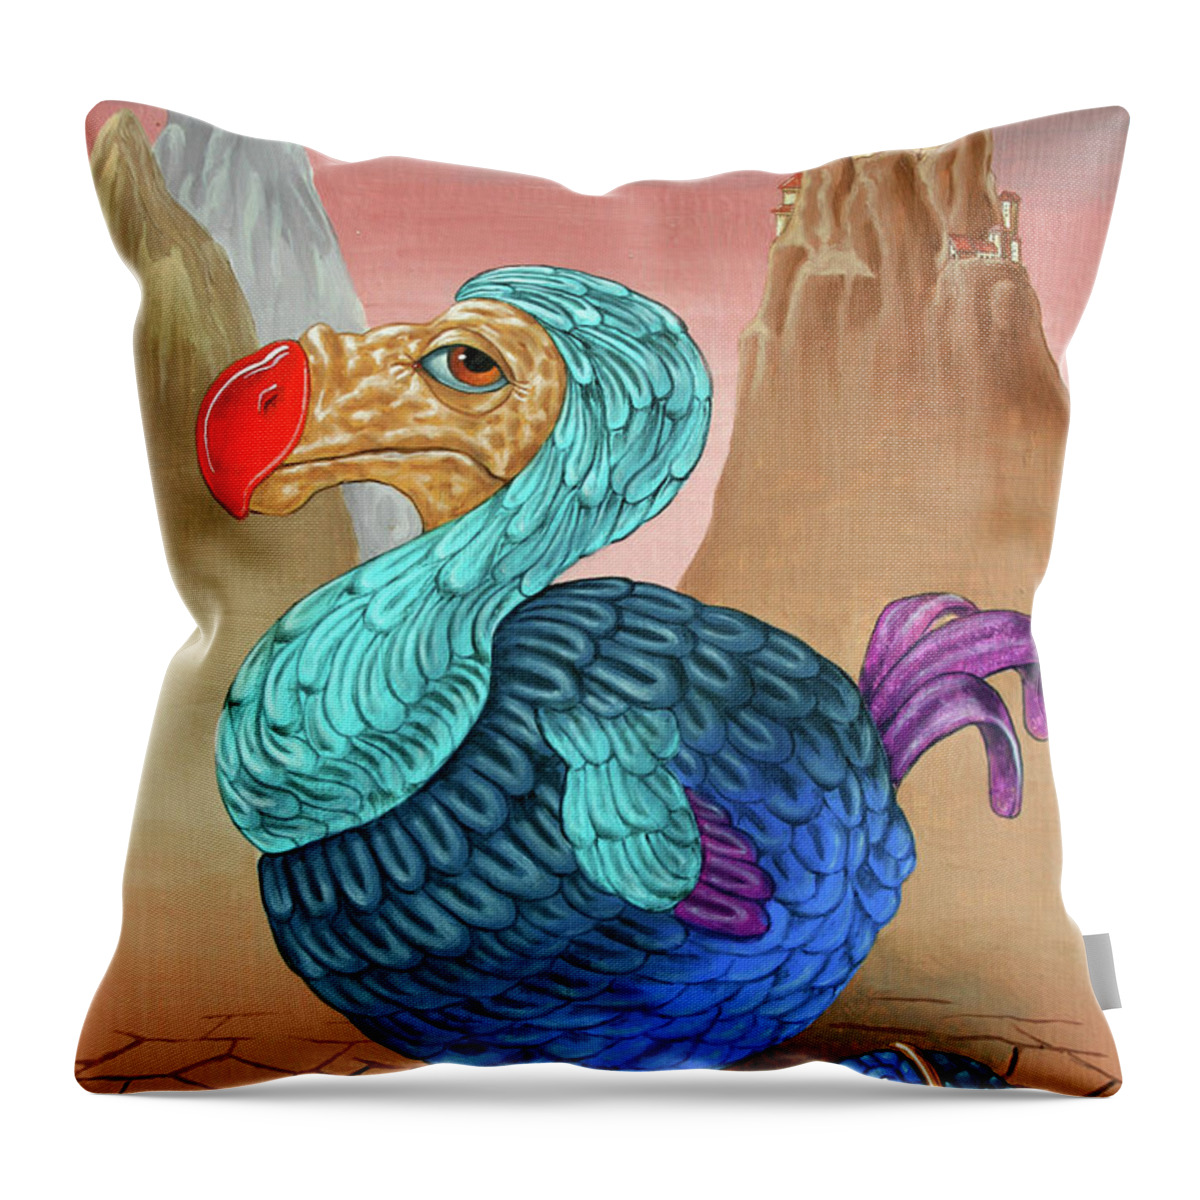 Dodo Throw Pillow featuring the painting Dodo by Victor Molev